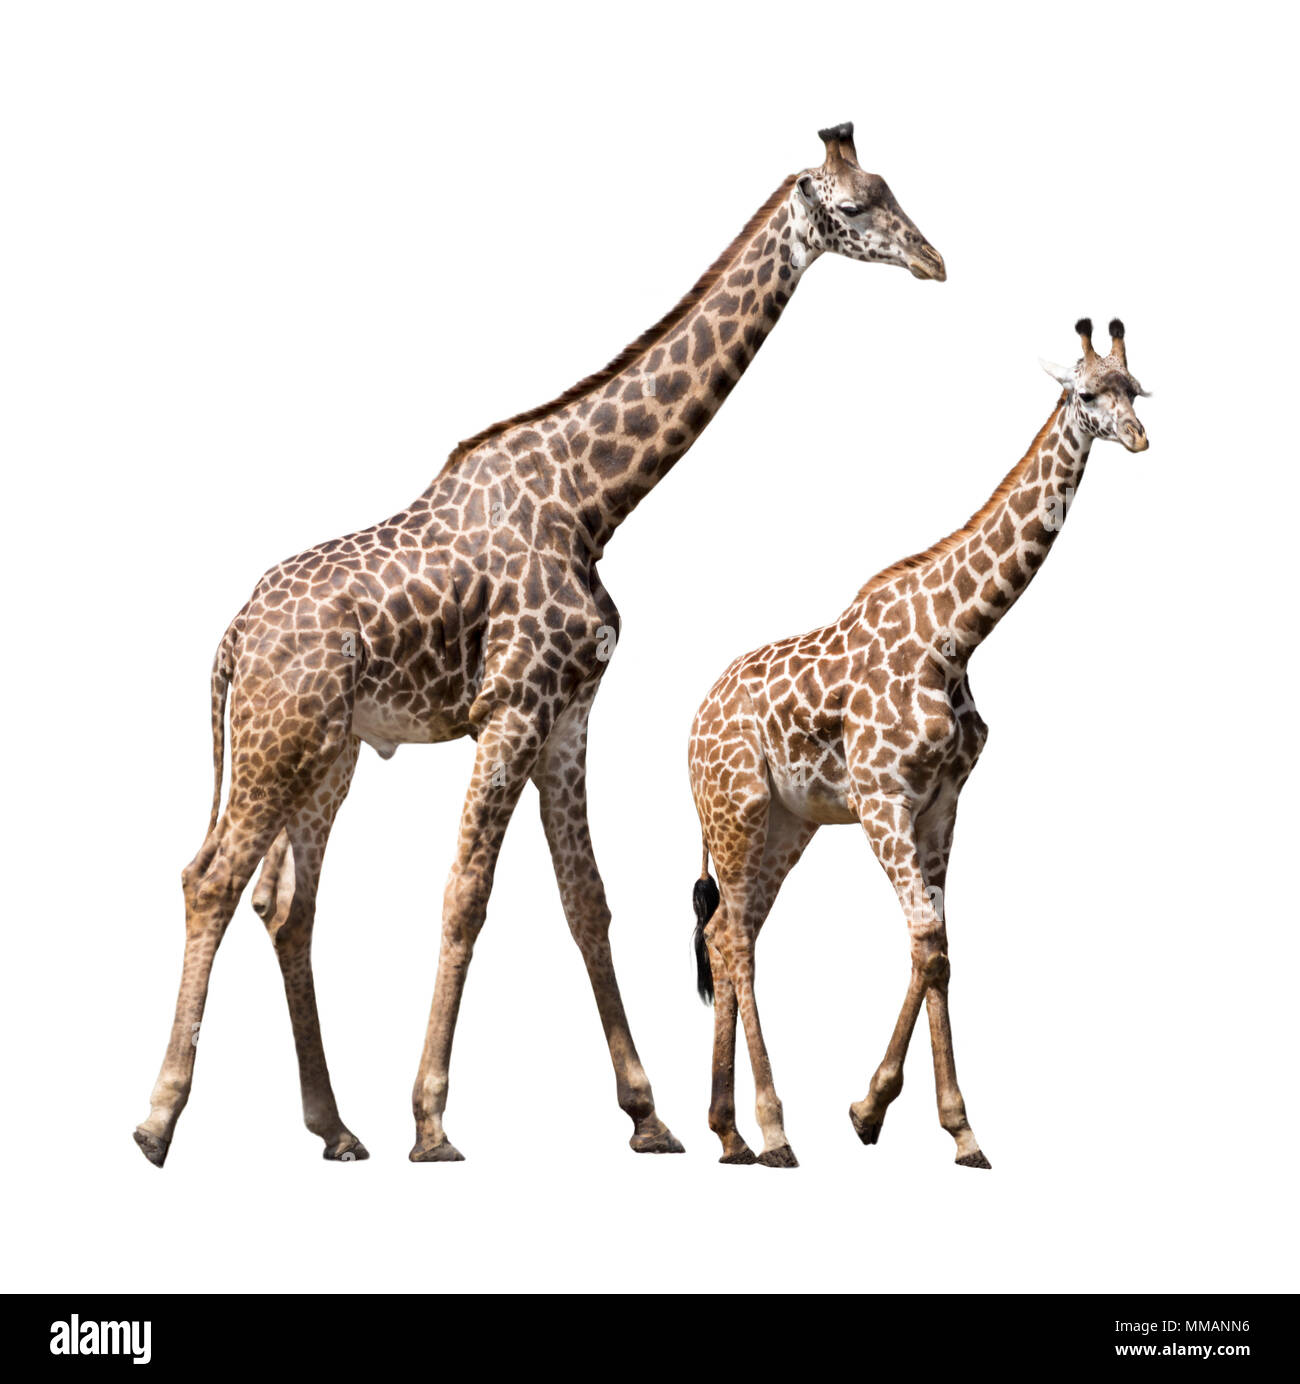 Two Giraffe isolated and placed on a white background. One is a full grown male and the other is a young juvenile female. Stock Photo